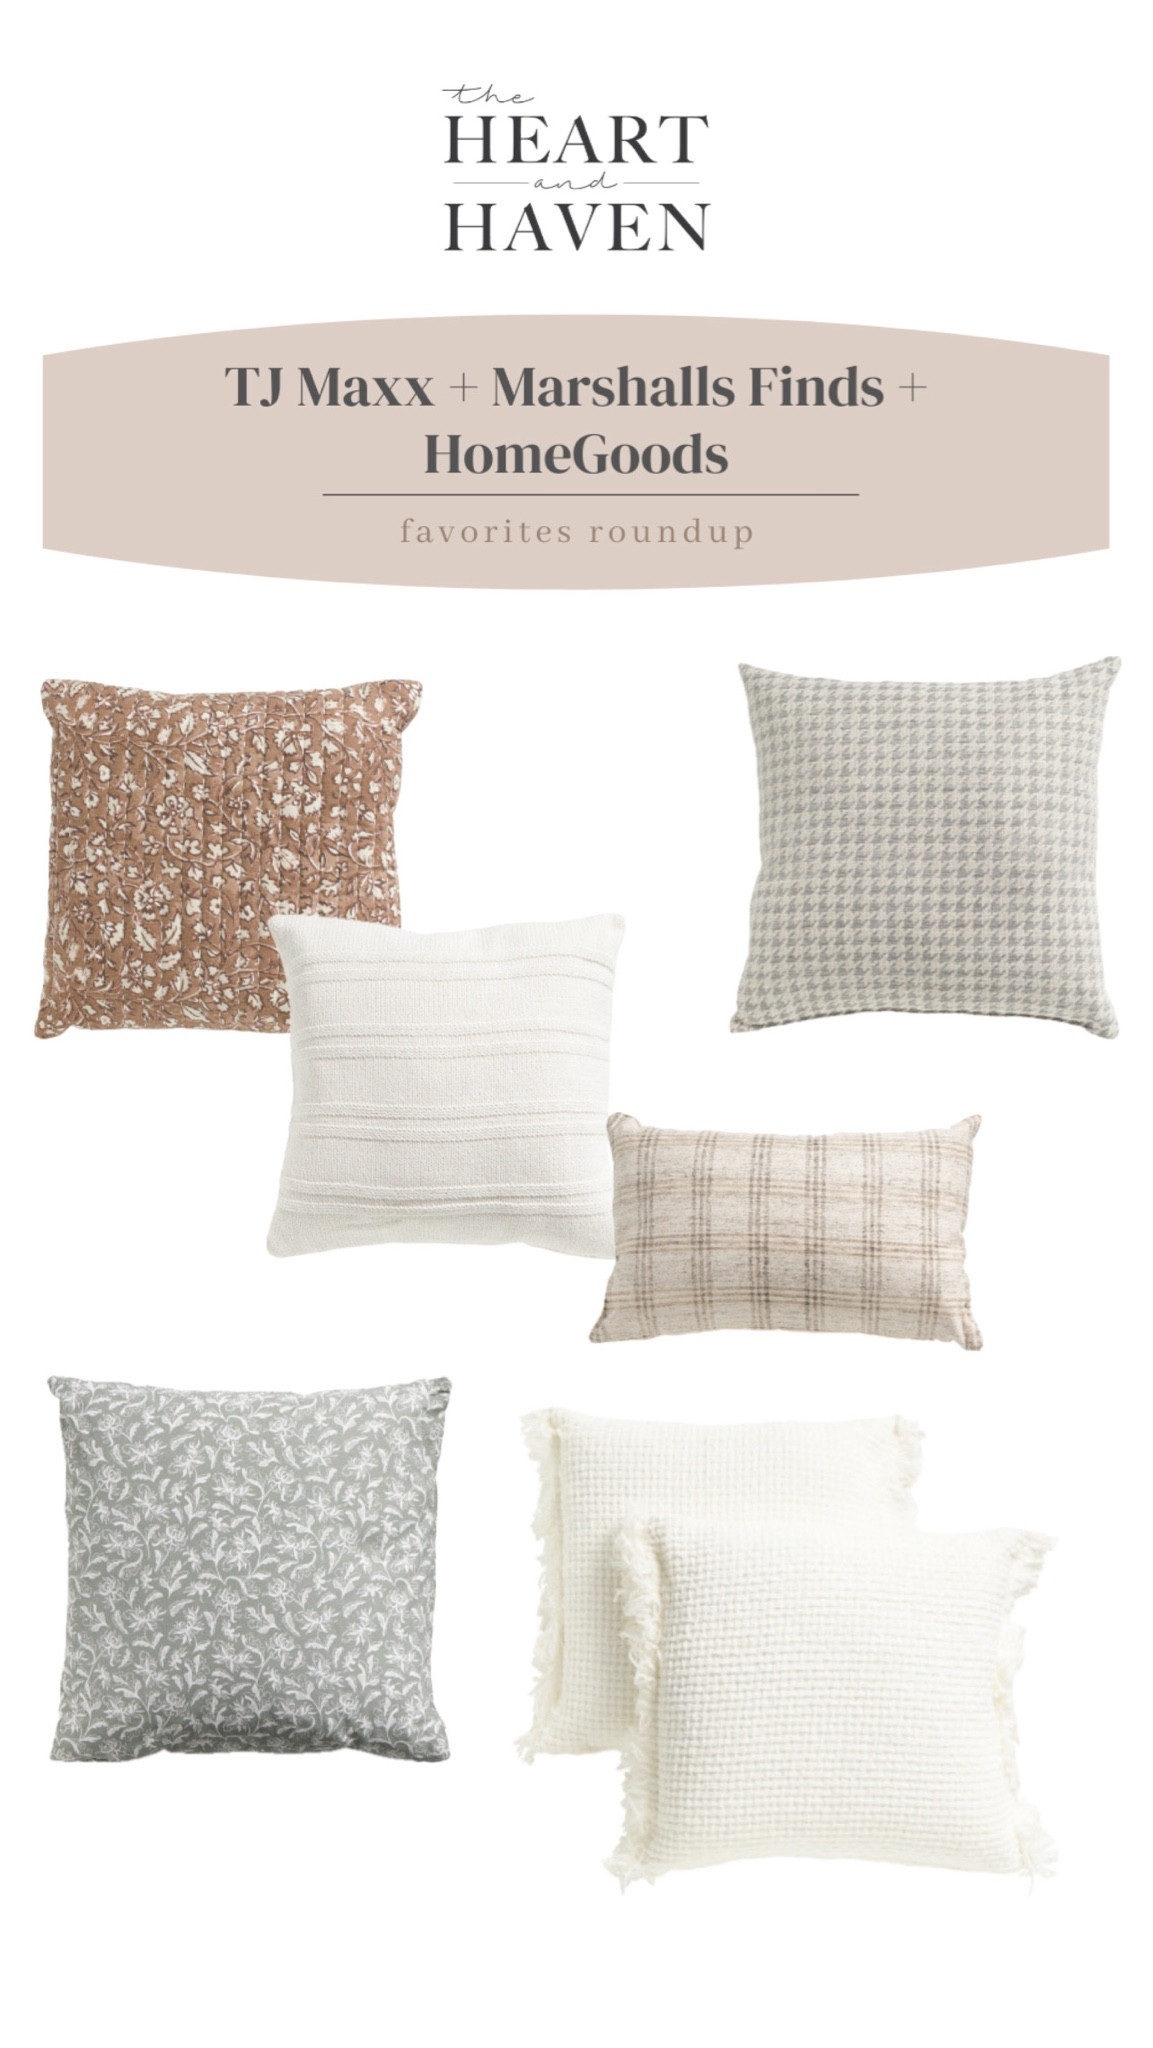 Pretty Pillows at TJ Maxx - The Lettered Cottage